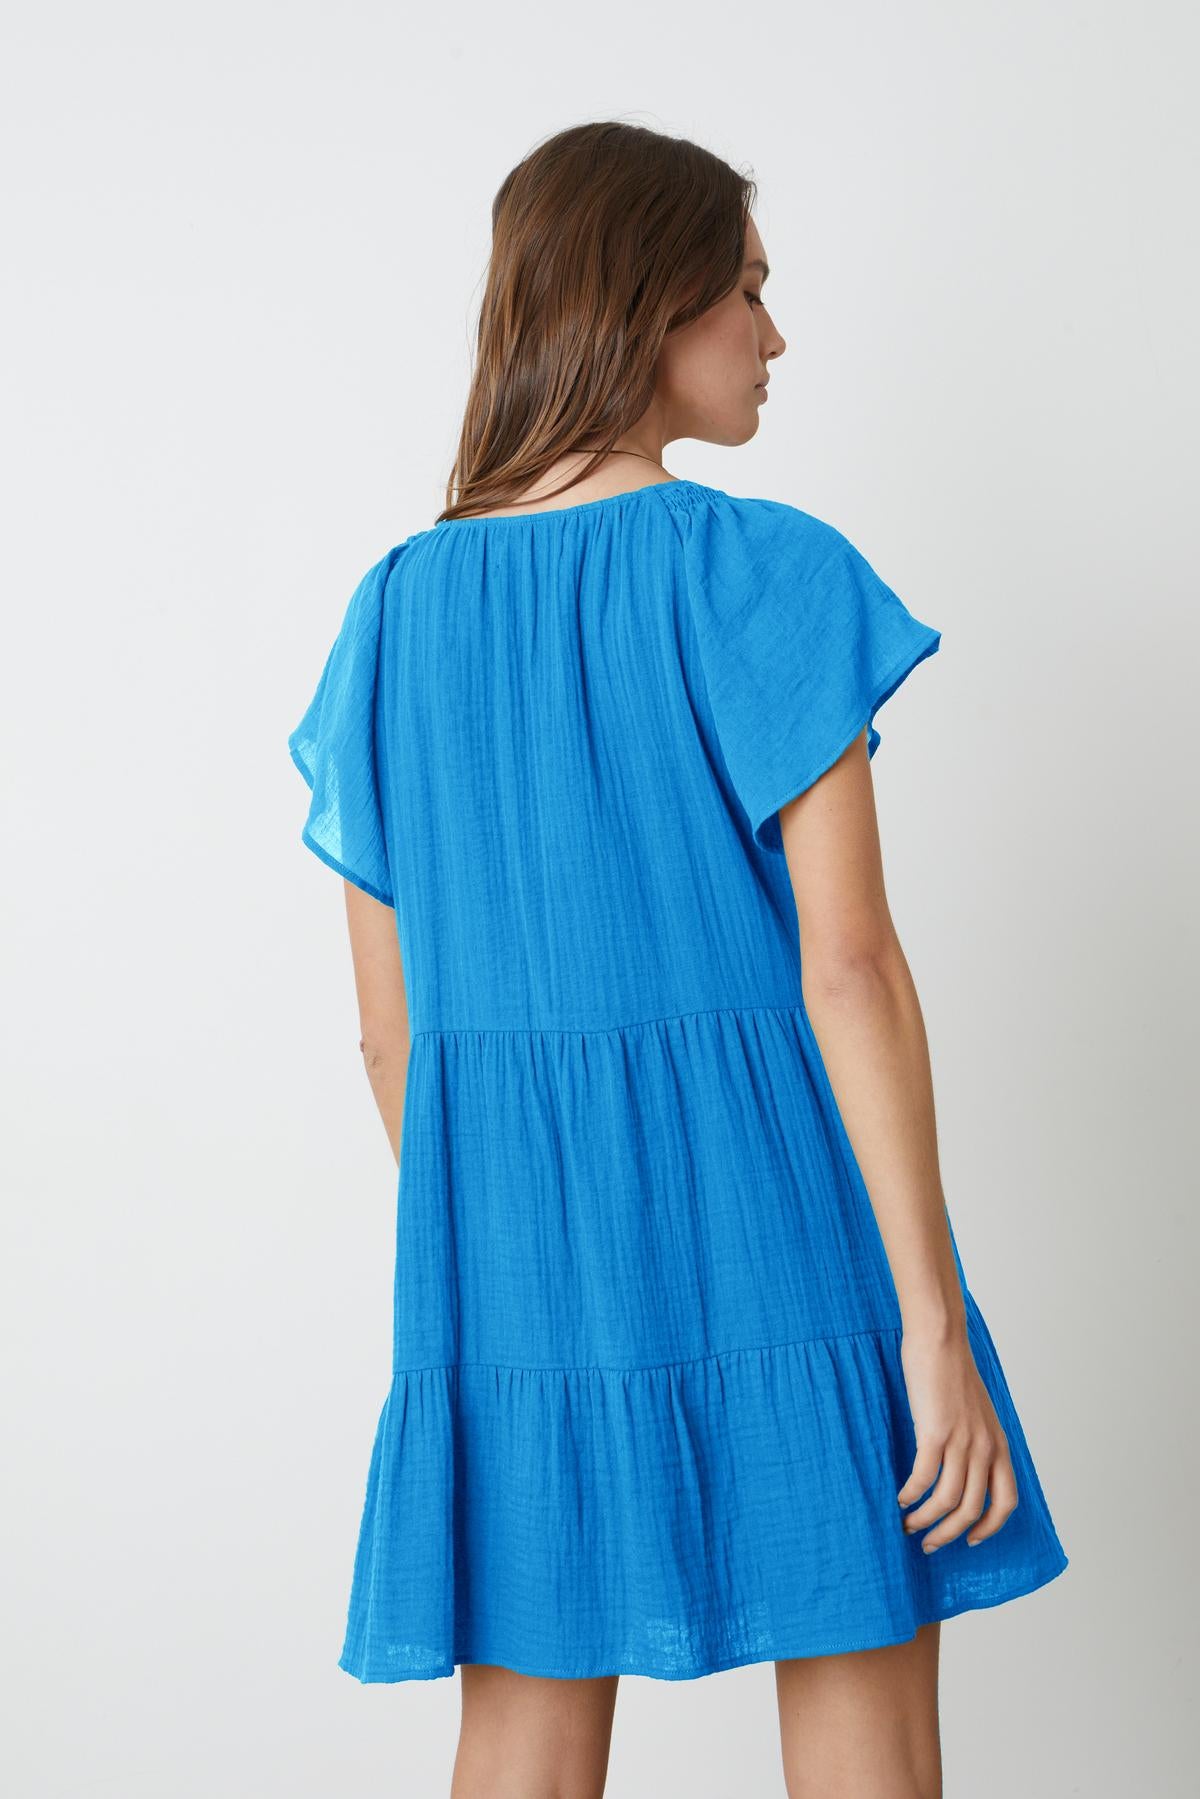 The back view of a woman wearing the Velvet by Graham & Spencer ELEANOR COTTON GAUZE TIERED DRESS with v-neckline and flutter sleeves.-35201175388353